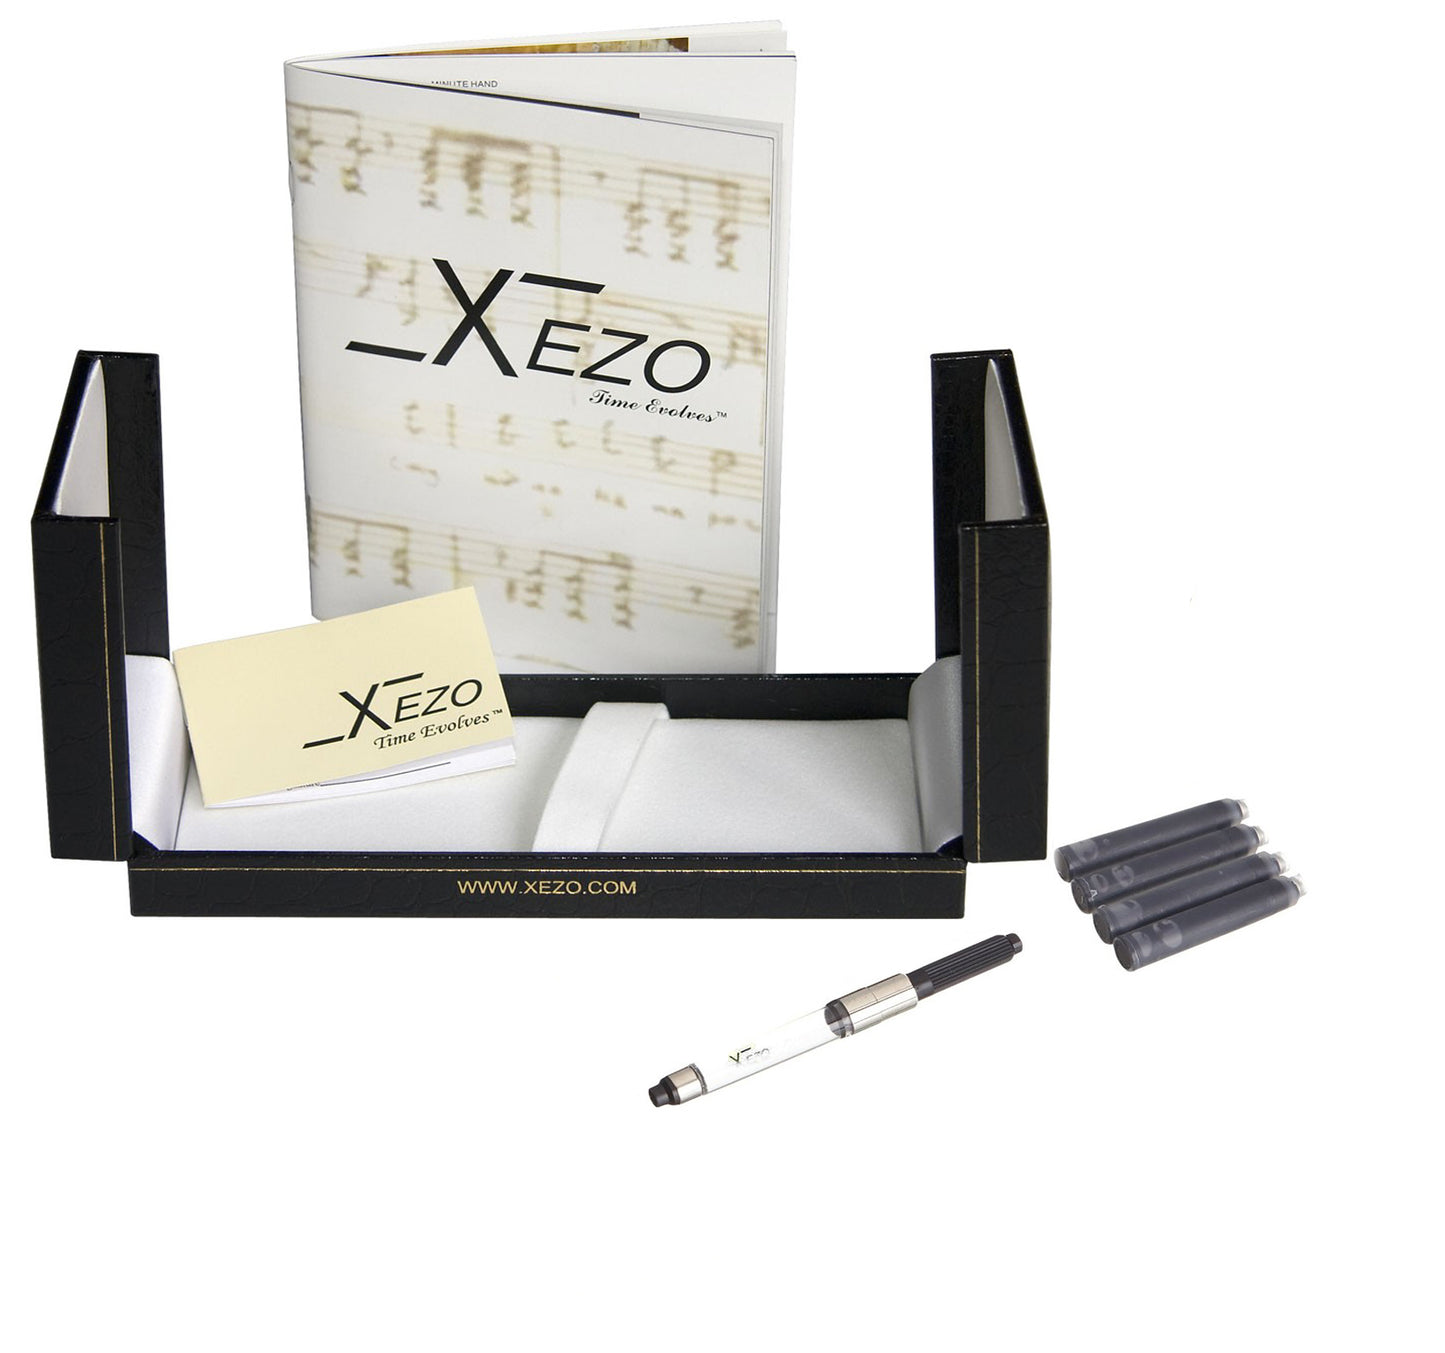 Xezo - Black gift box, certificate, manual, chrome-plated ink converter, and four ink cartridges of the Maestro Sea Shell FPG-M fountain pen